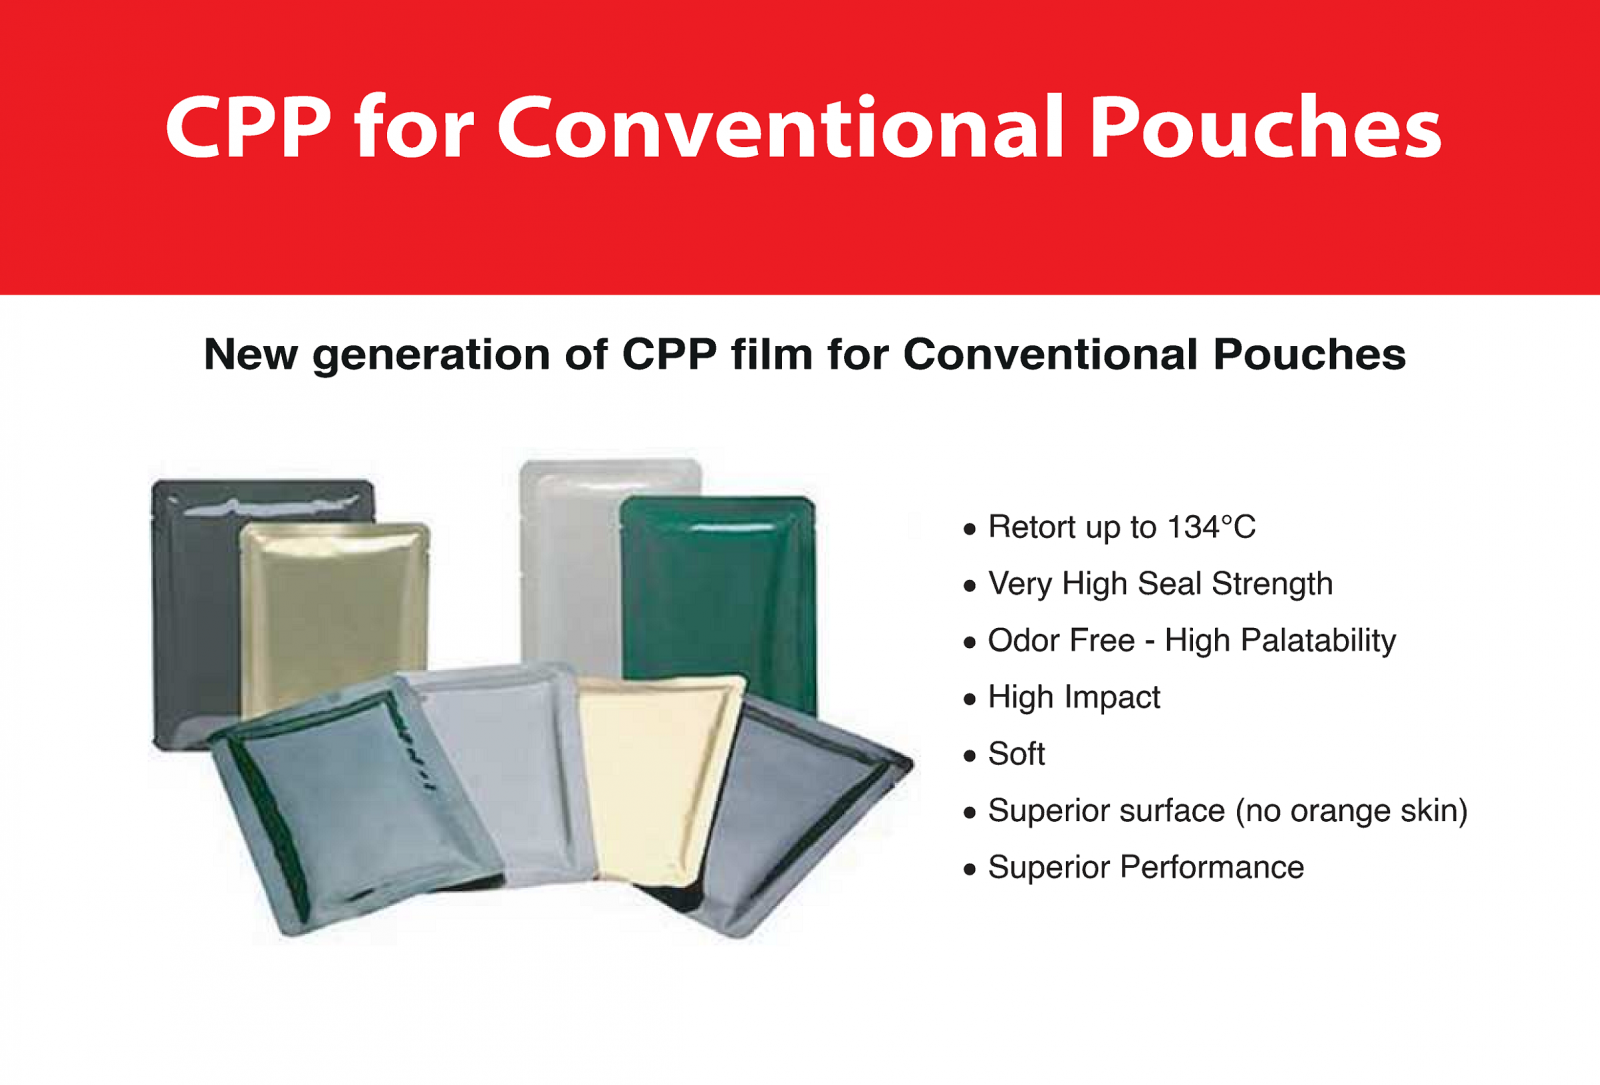 CPP_for_Conventional_Pouches_RCH-71